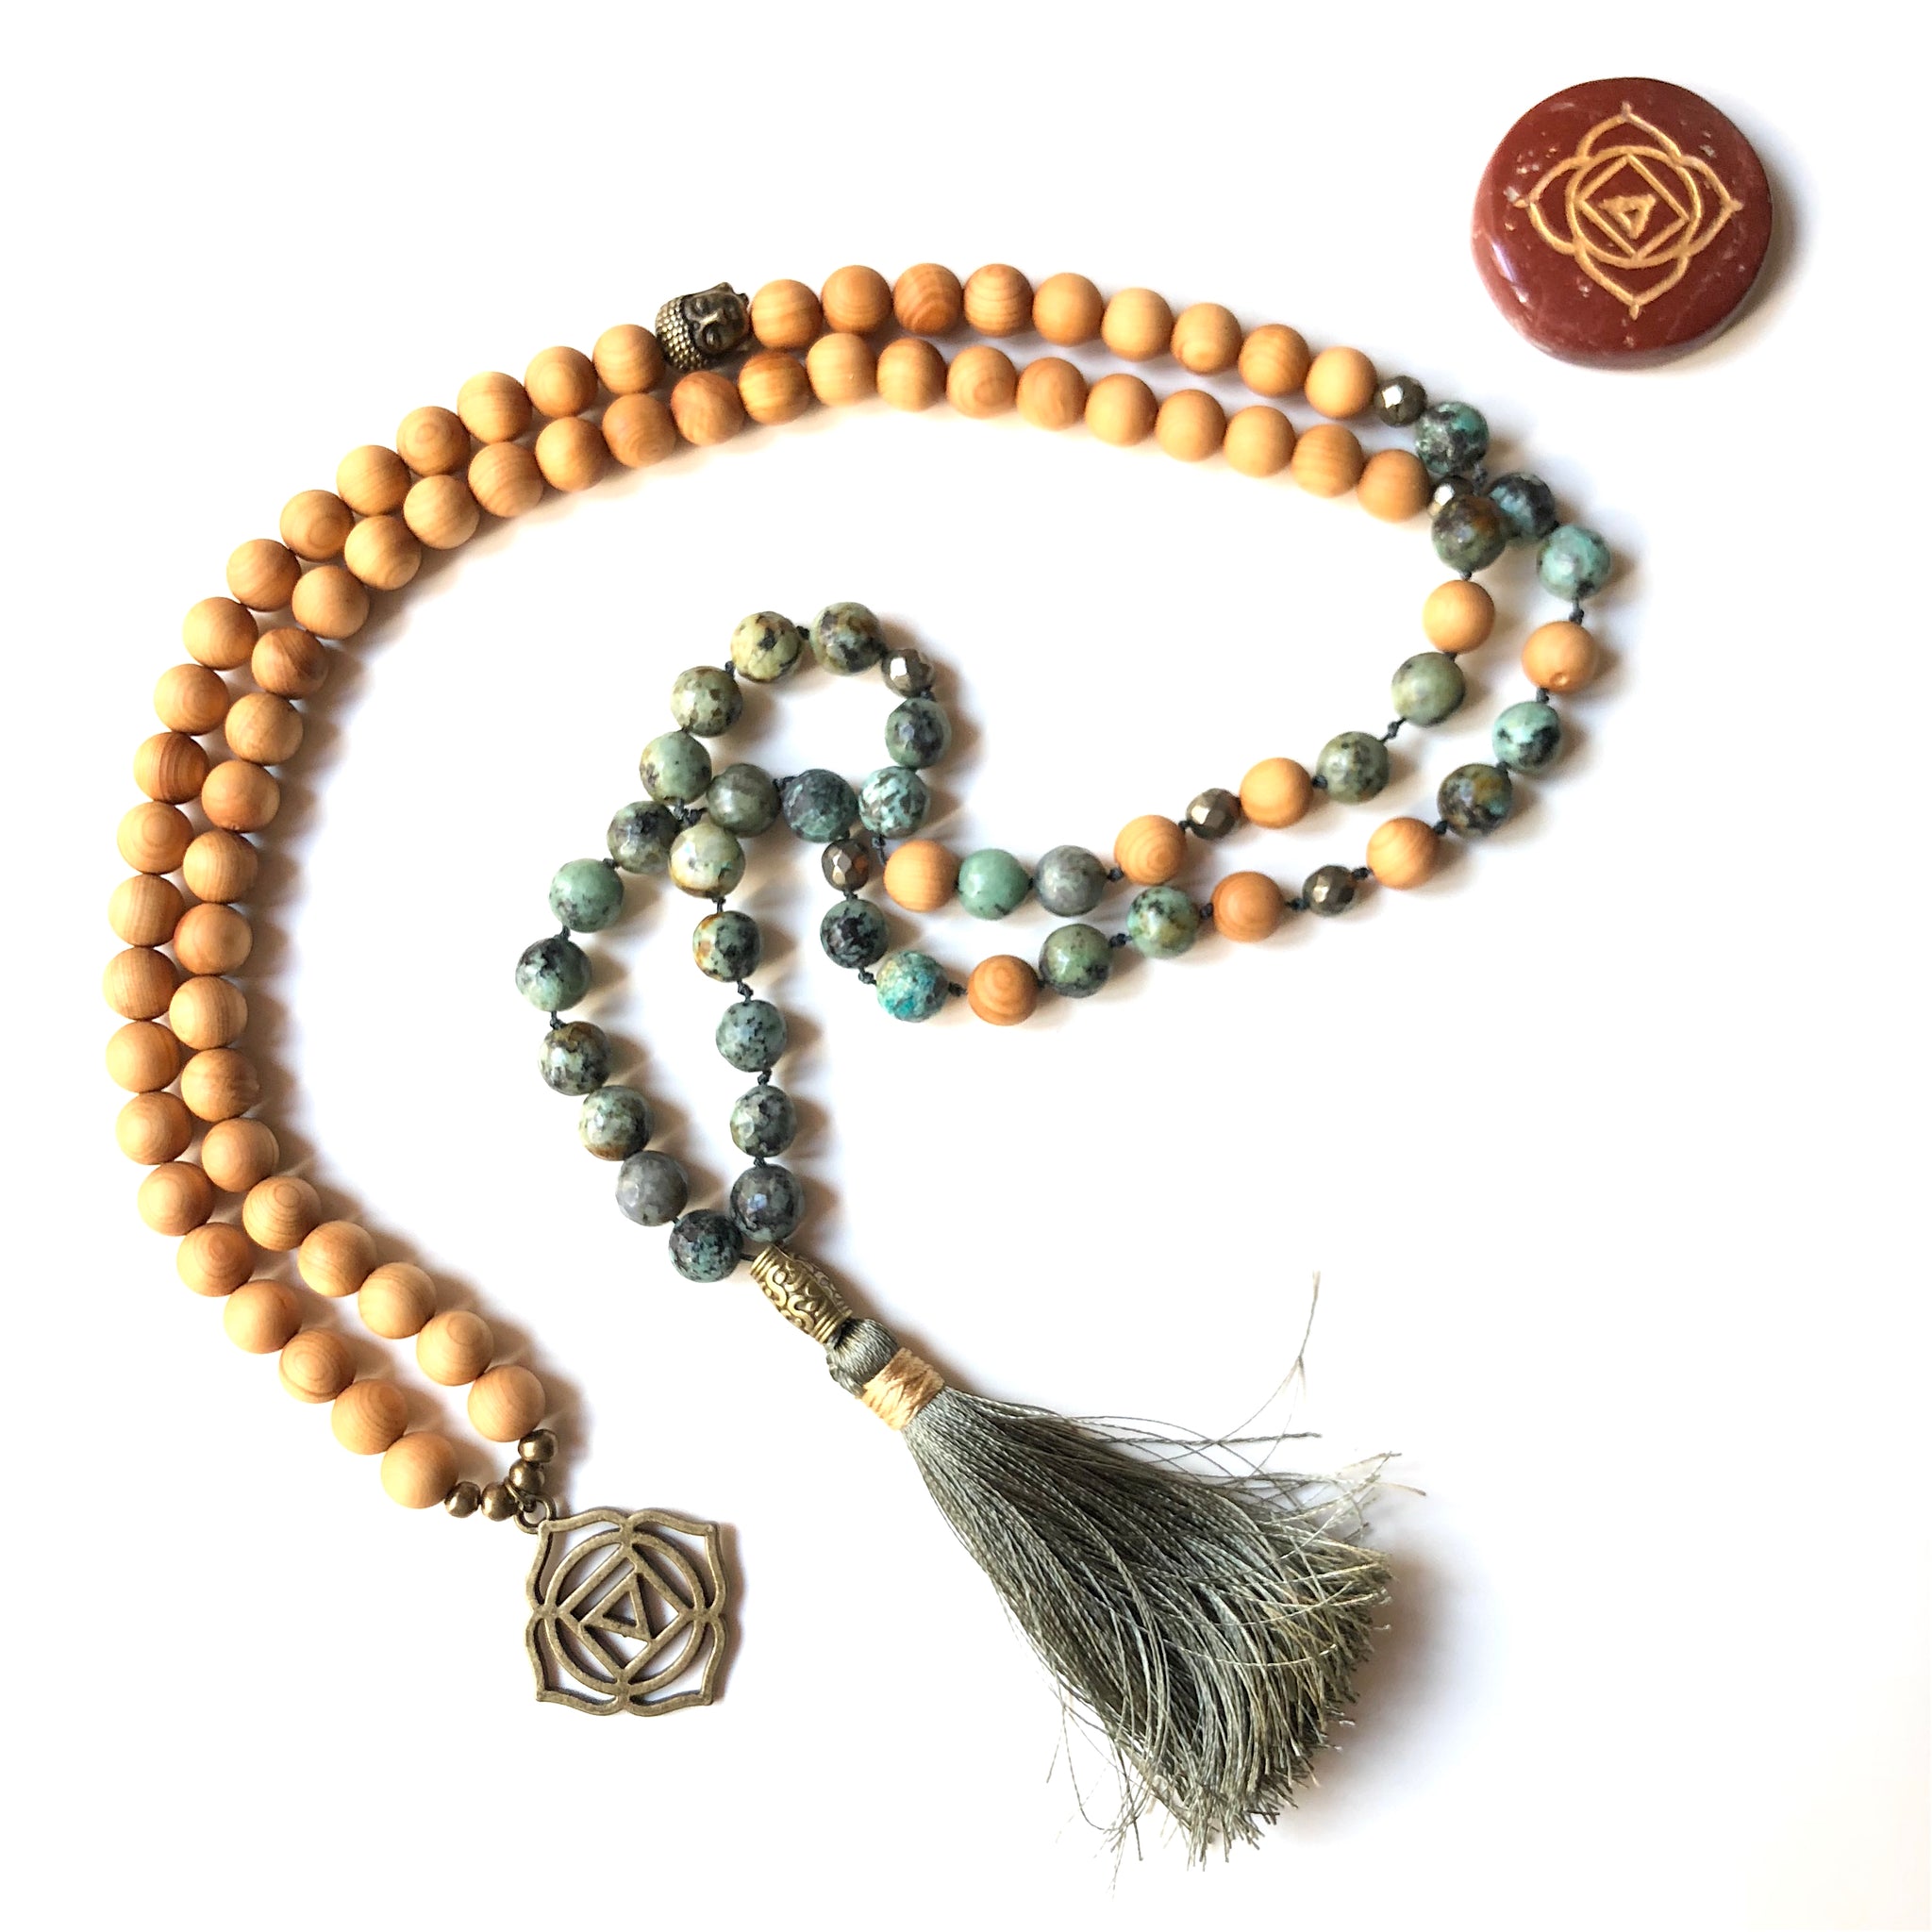 Aria Mala Atelier's unique one-of-a-kind African turquoise gemstone meditation japa mala with first (root) chakra charm is for yoga meditation empowering spiritual daily practise and intention setting